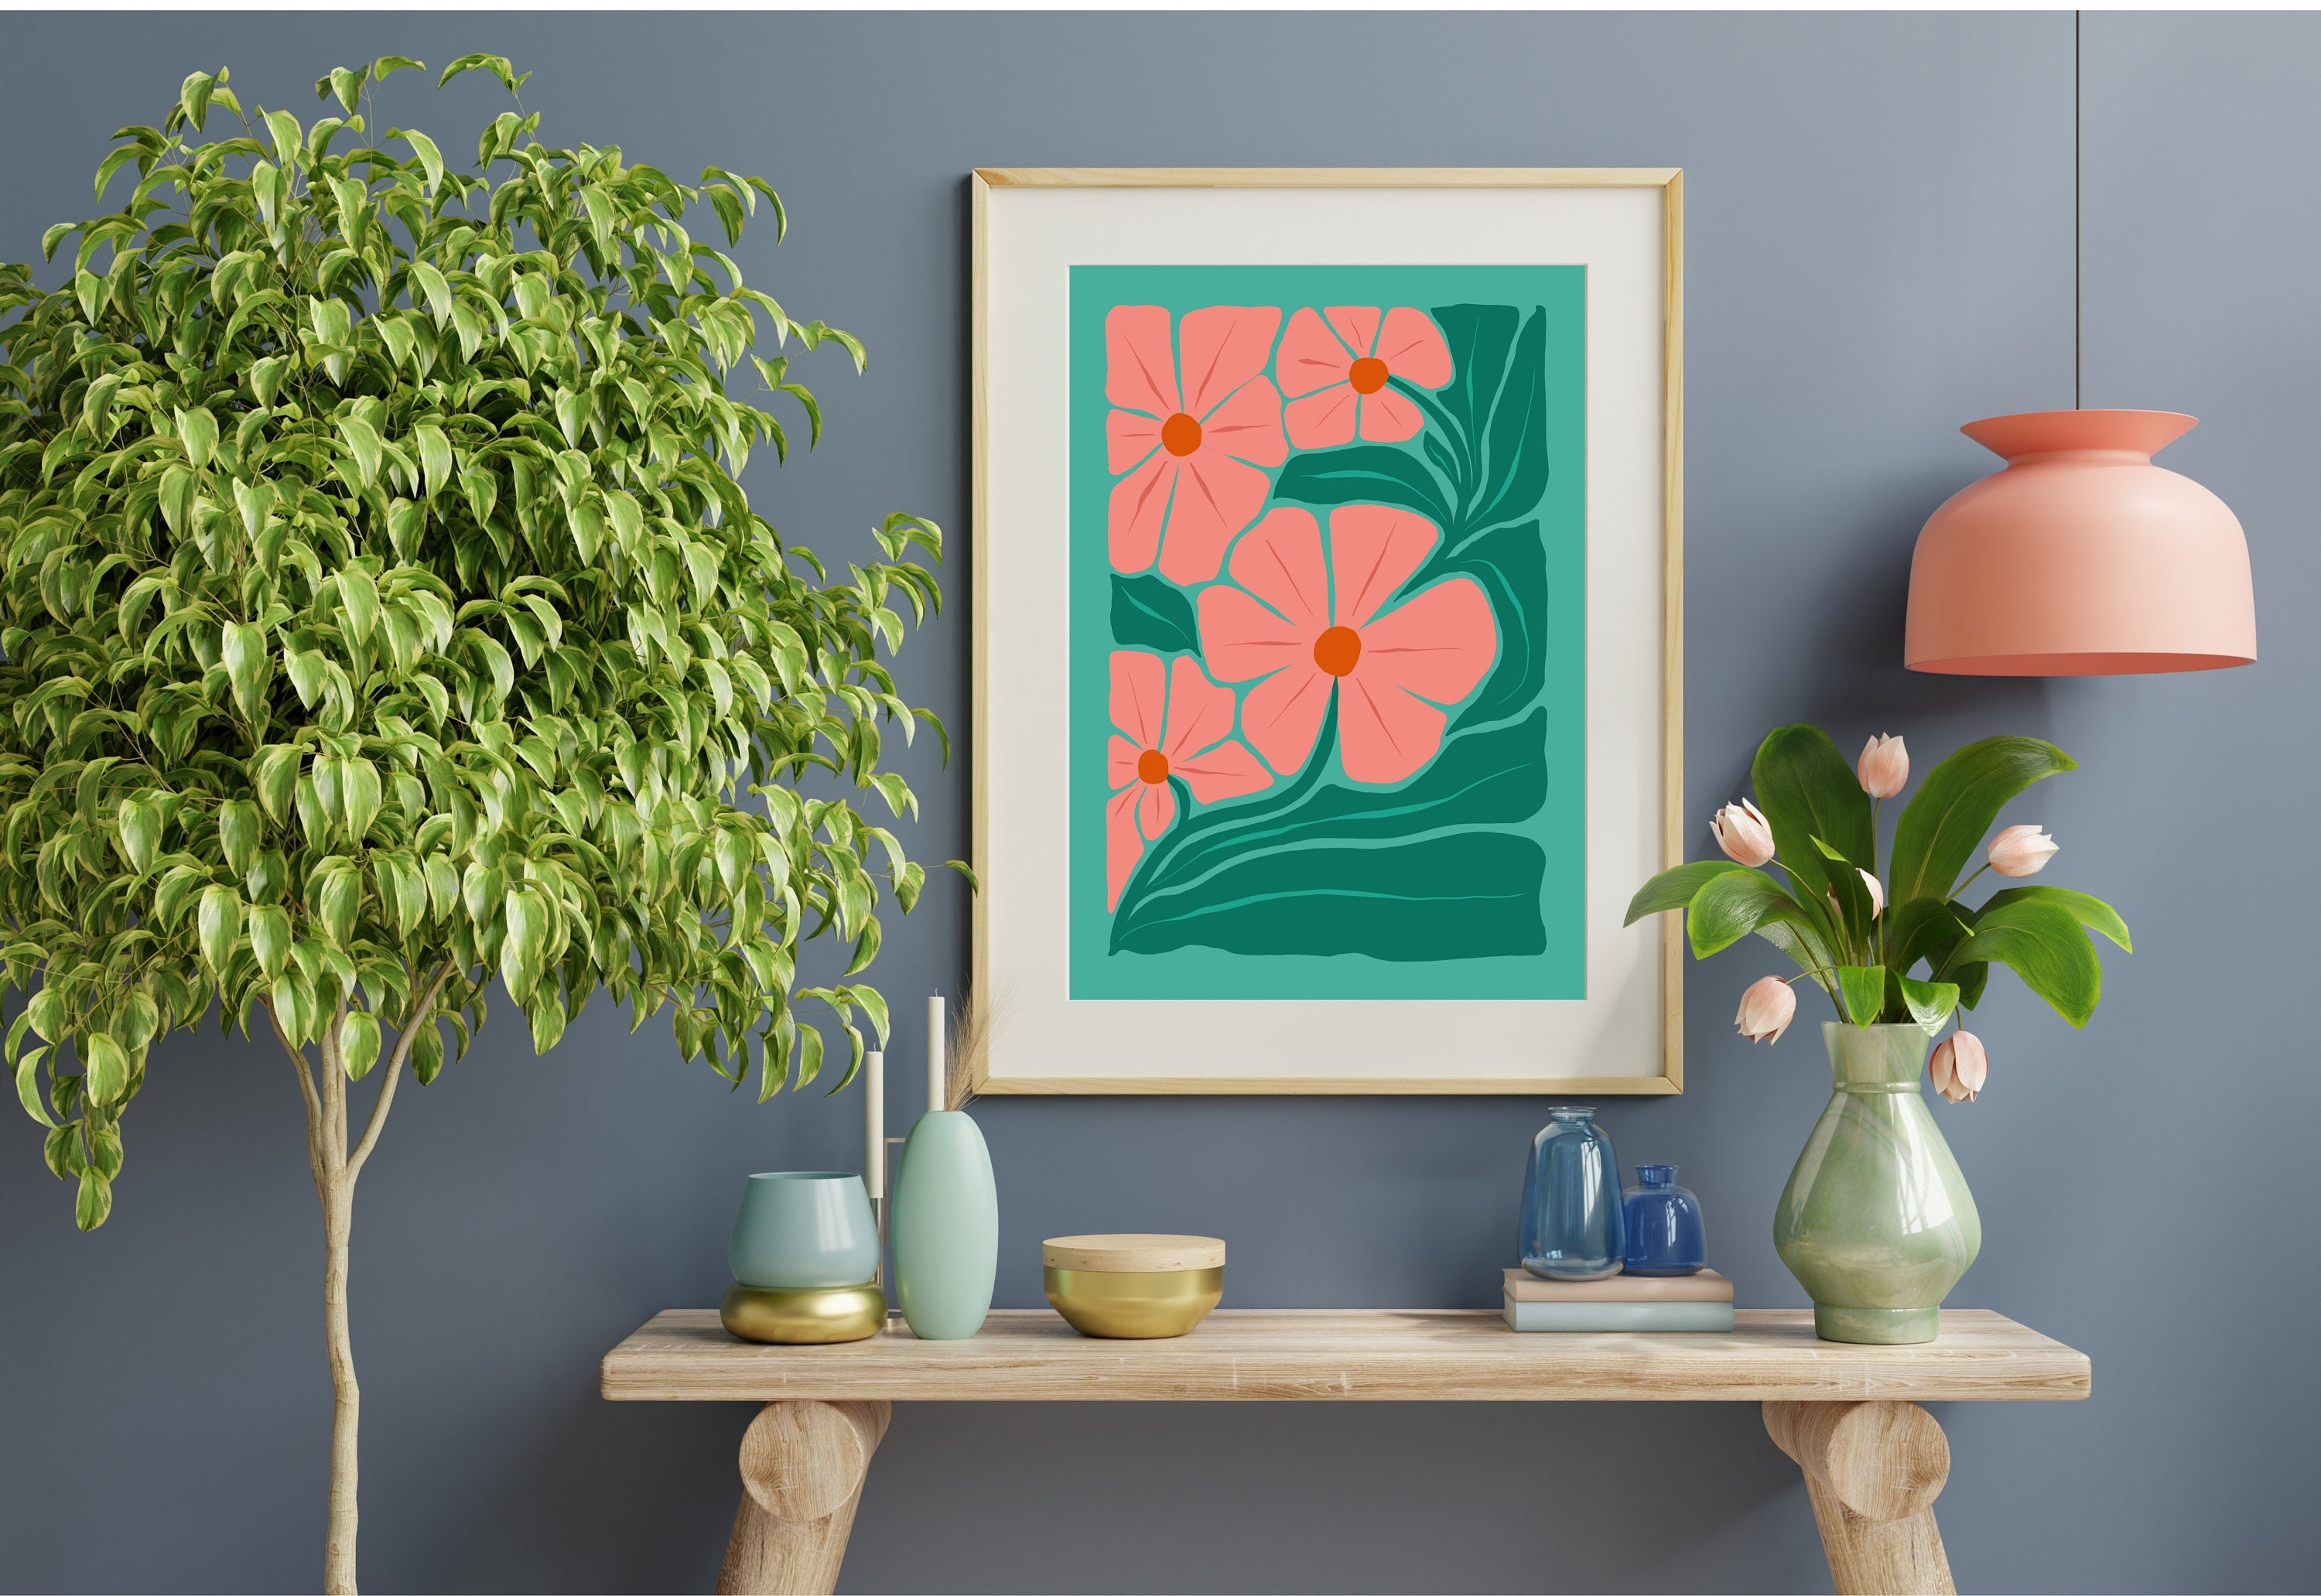 Ethereal blossoms depicted in abstract forms, exuding charm and artistry in this digital print.